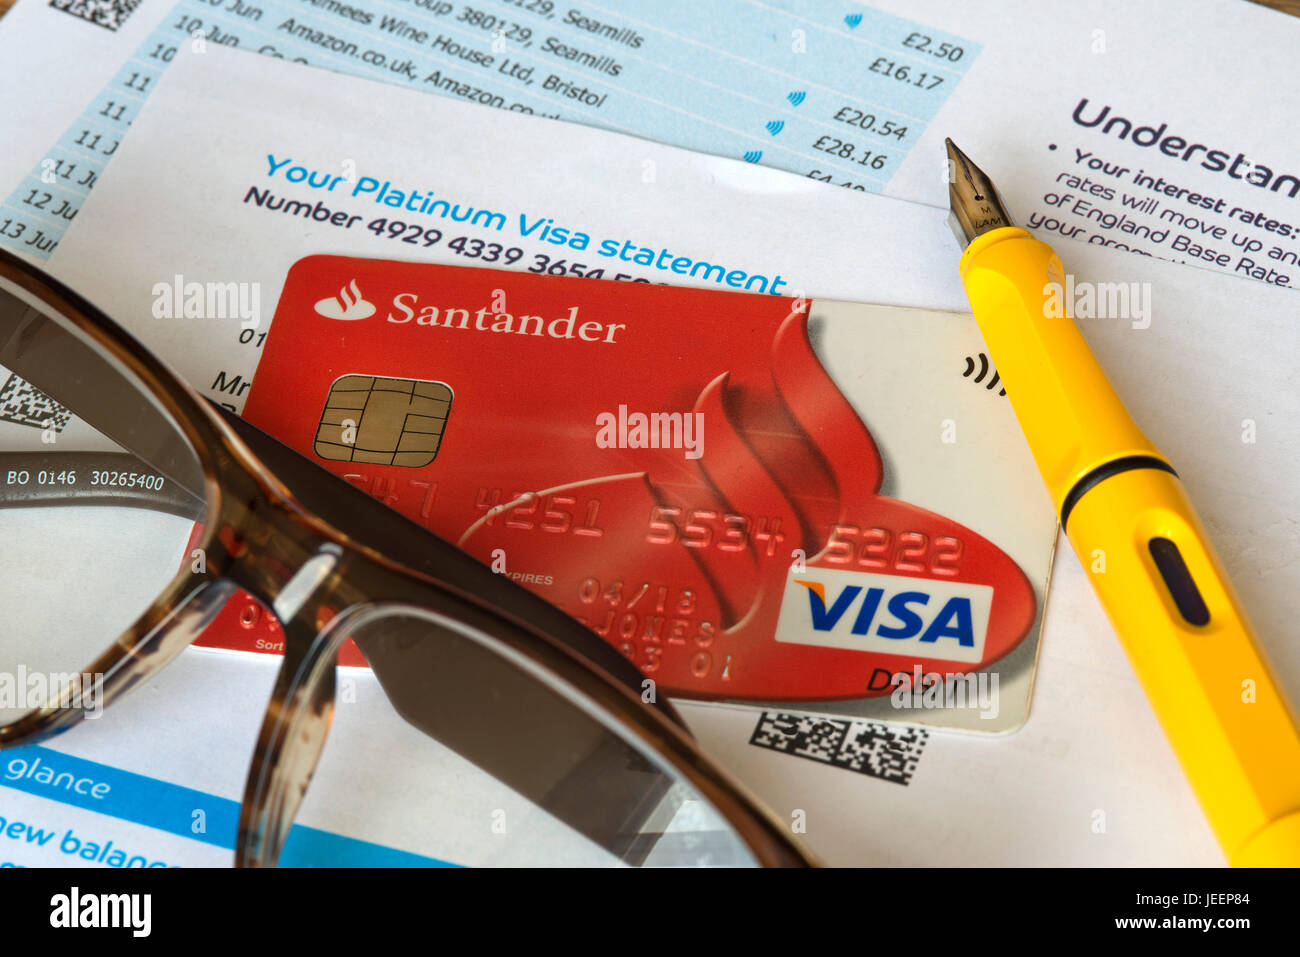 Santander Visa Card High Resolution Stock Photography and Images - Alamy